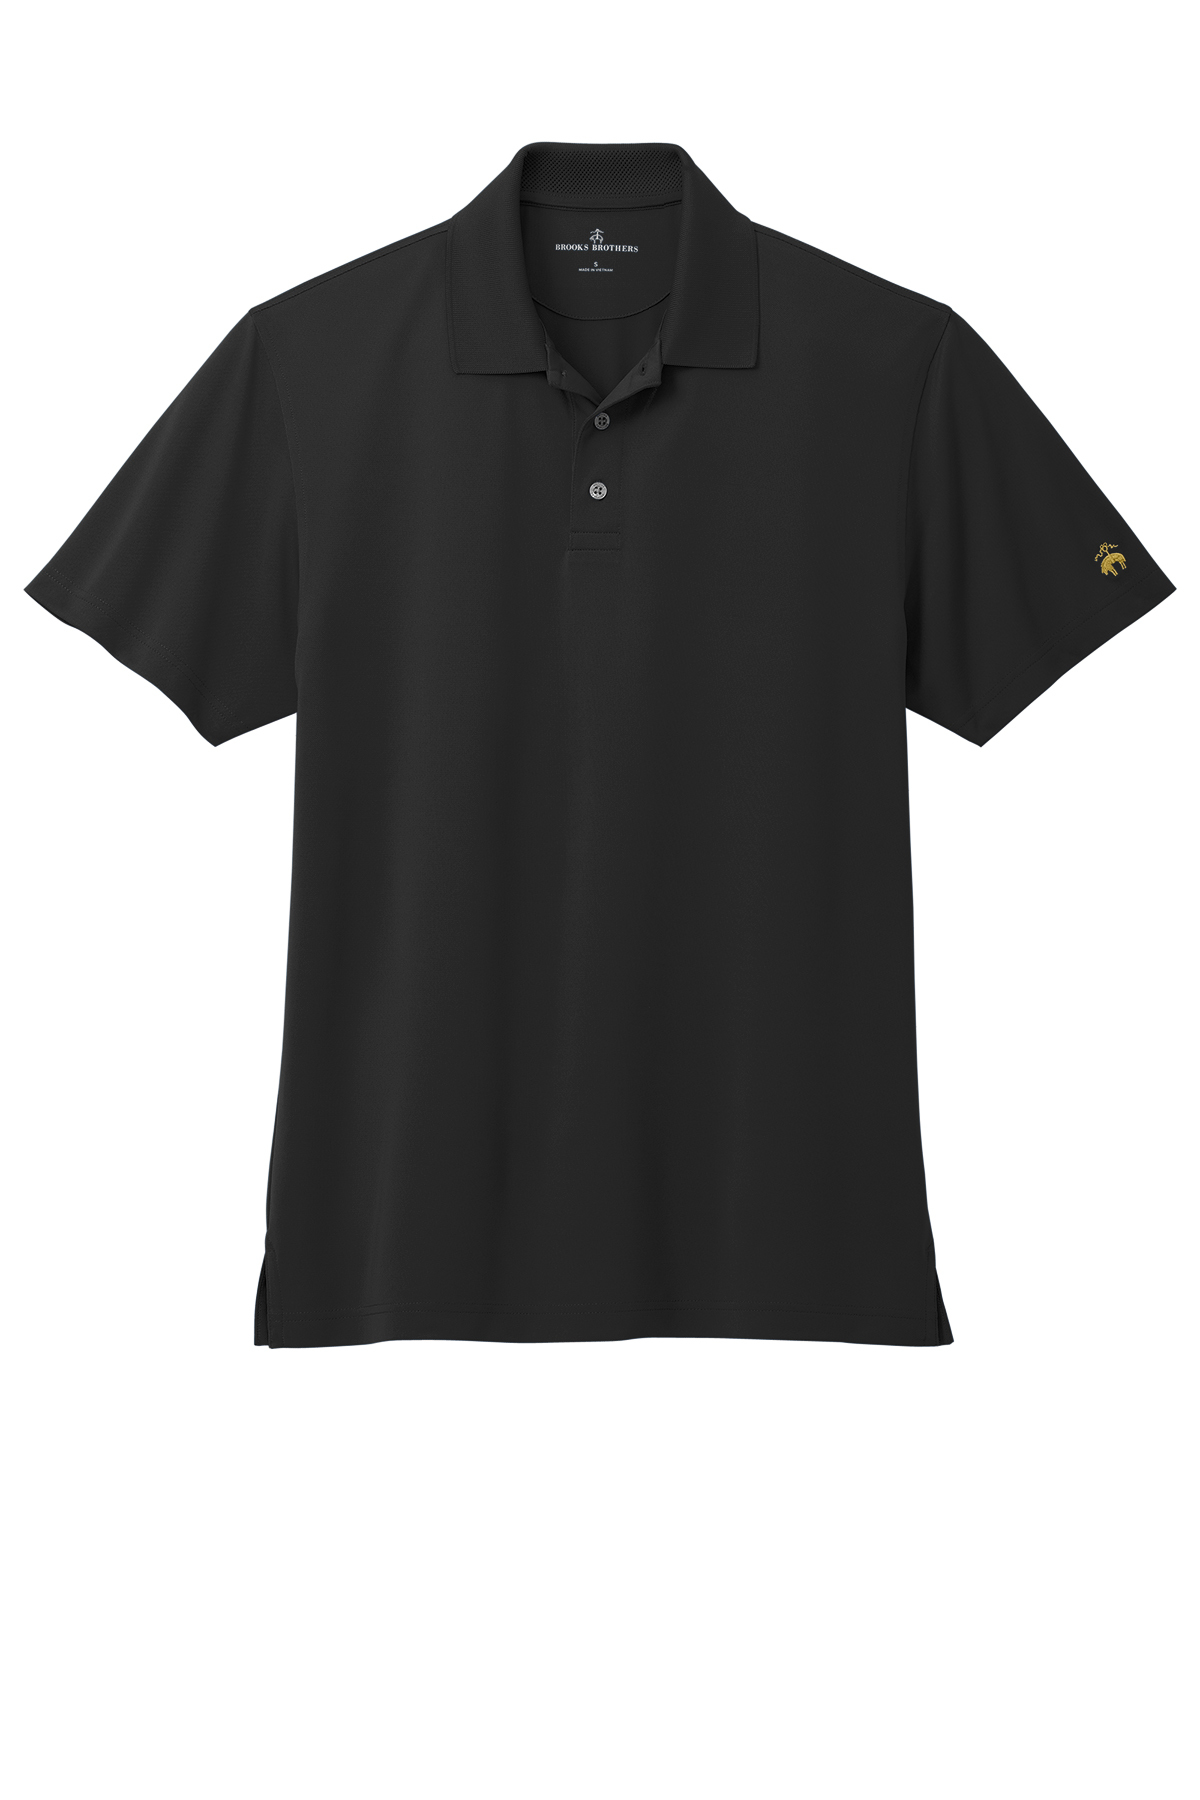  Brooks Brothers® Mesh Pique Performance Polo